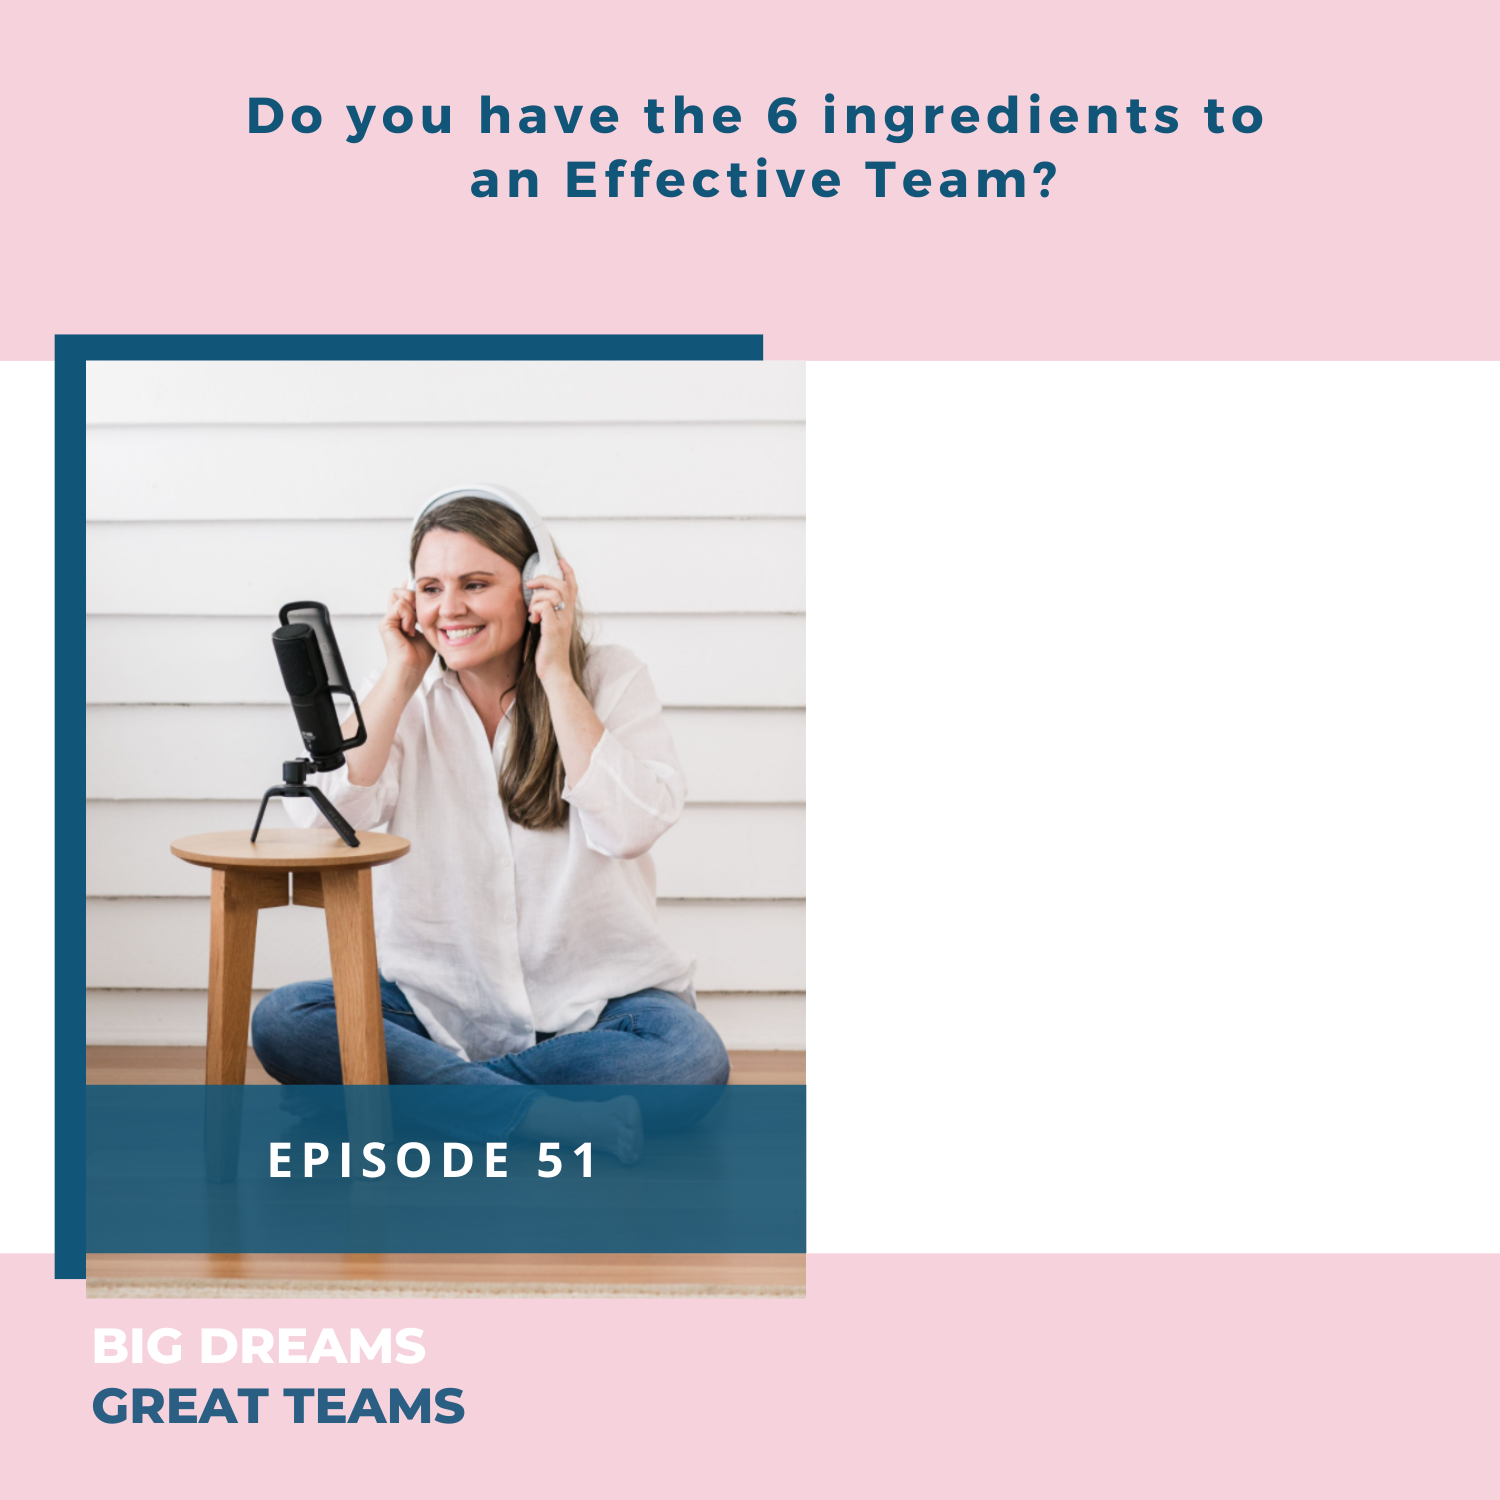 Do you have the 6 ingredients to an Effective Team?